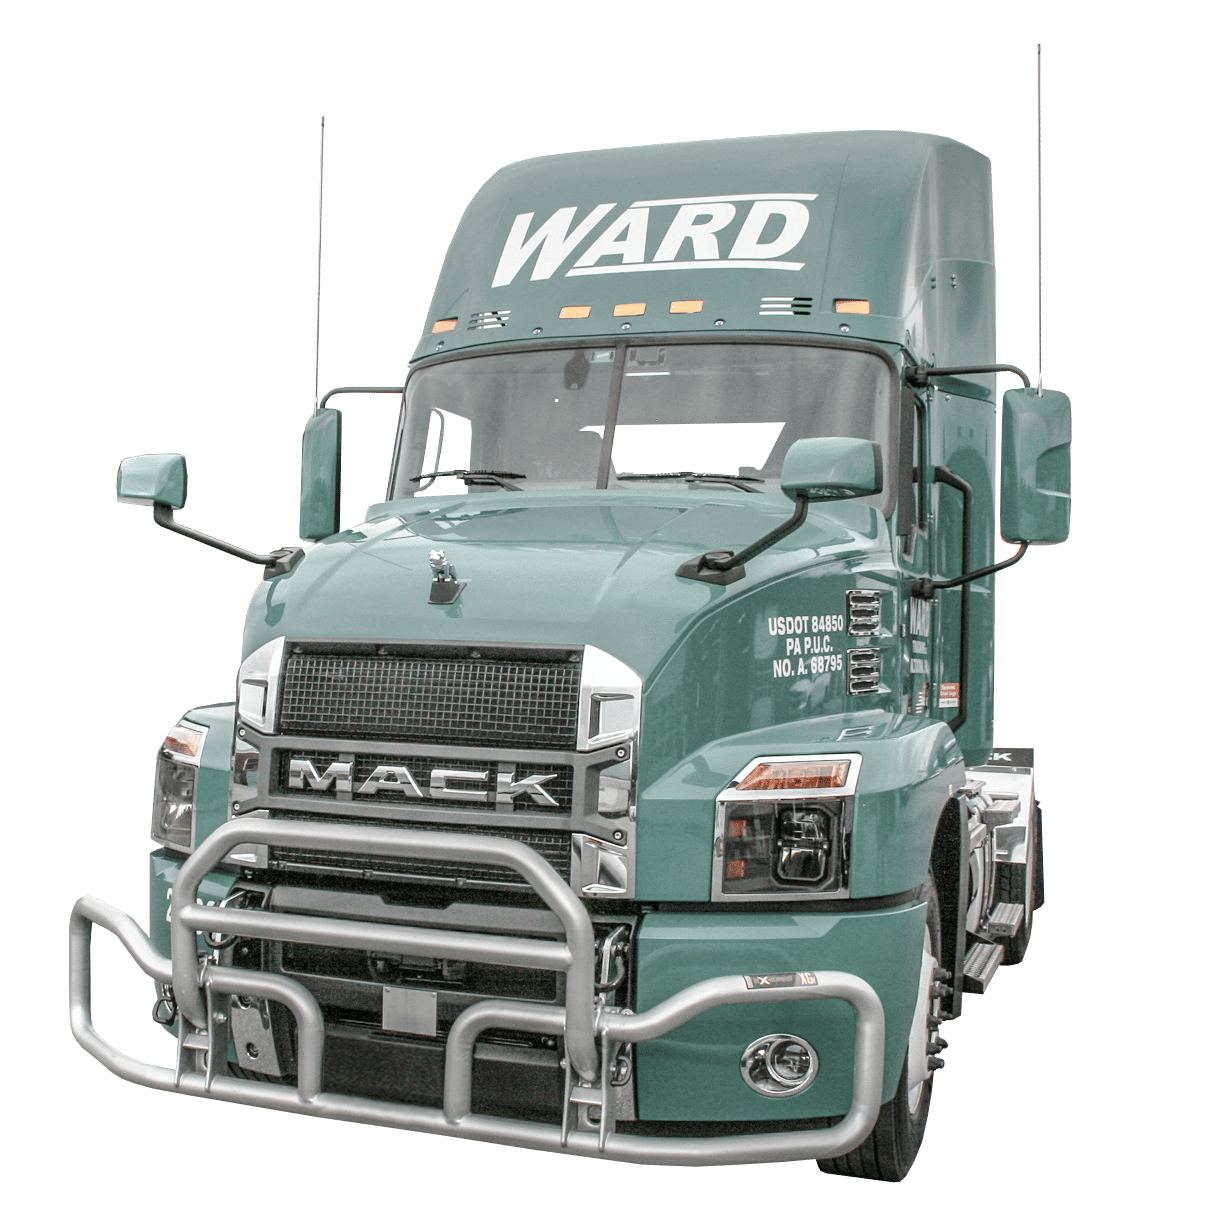 A Mack Truck - Green - with Ward name on top